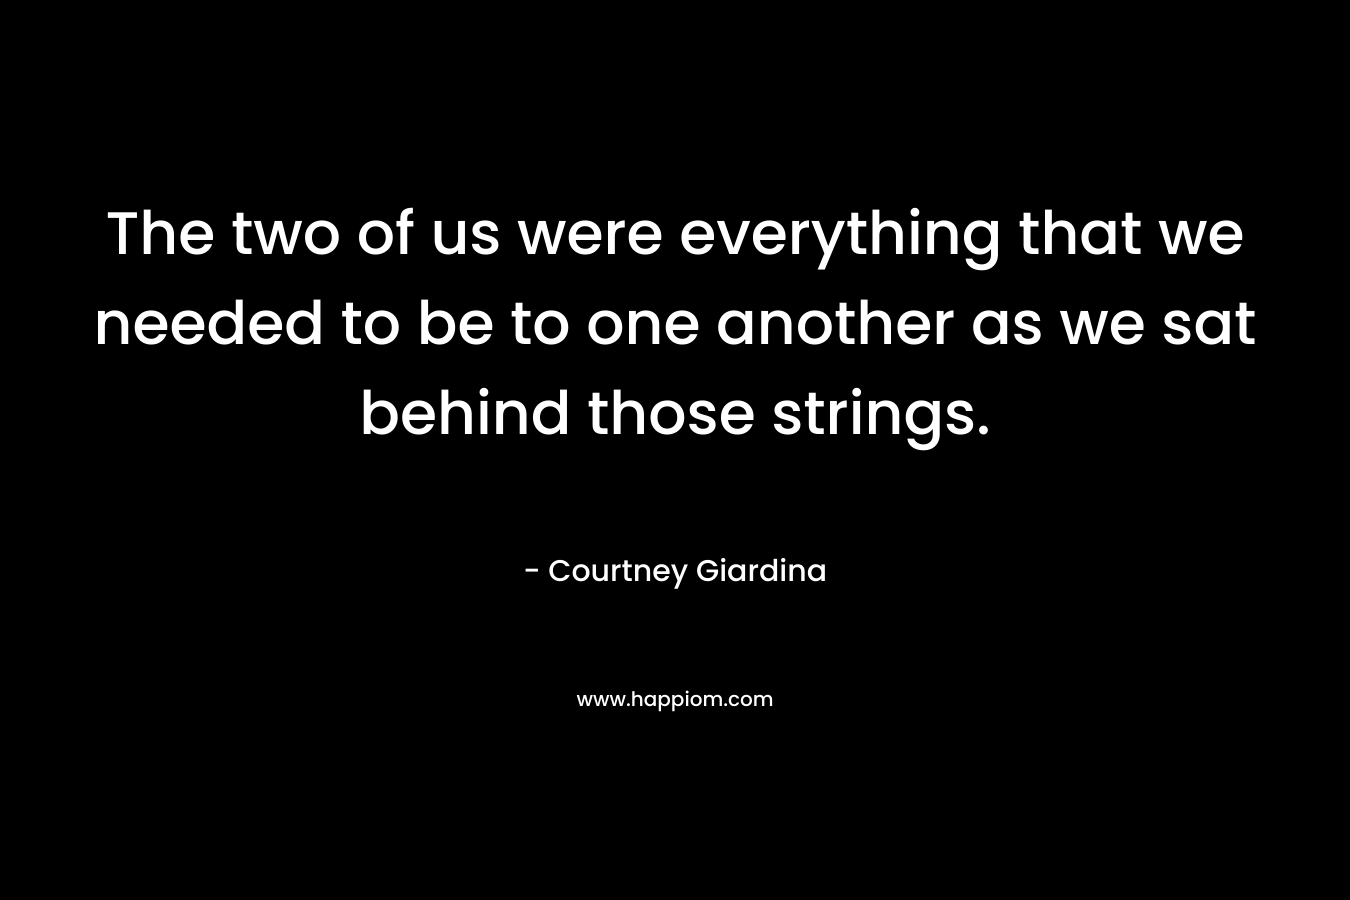 The two of us were everything that we needed to be to one another as we sat behind those strings.